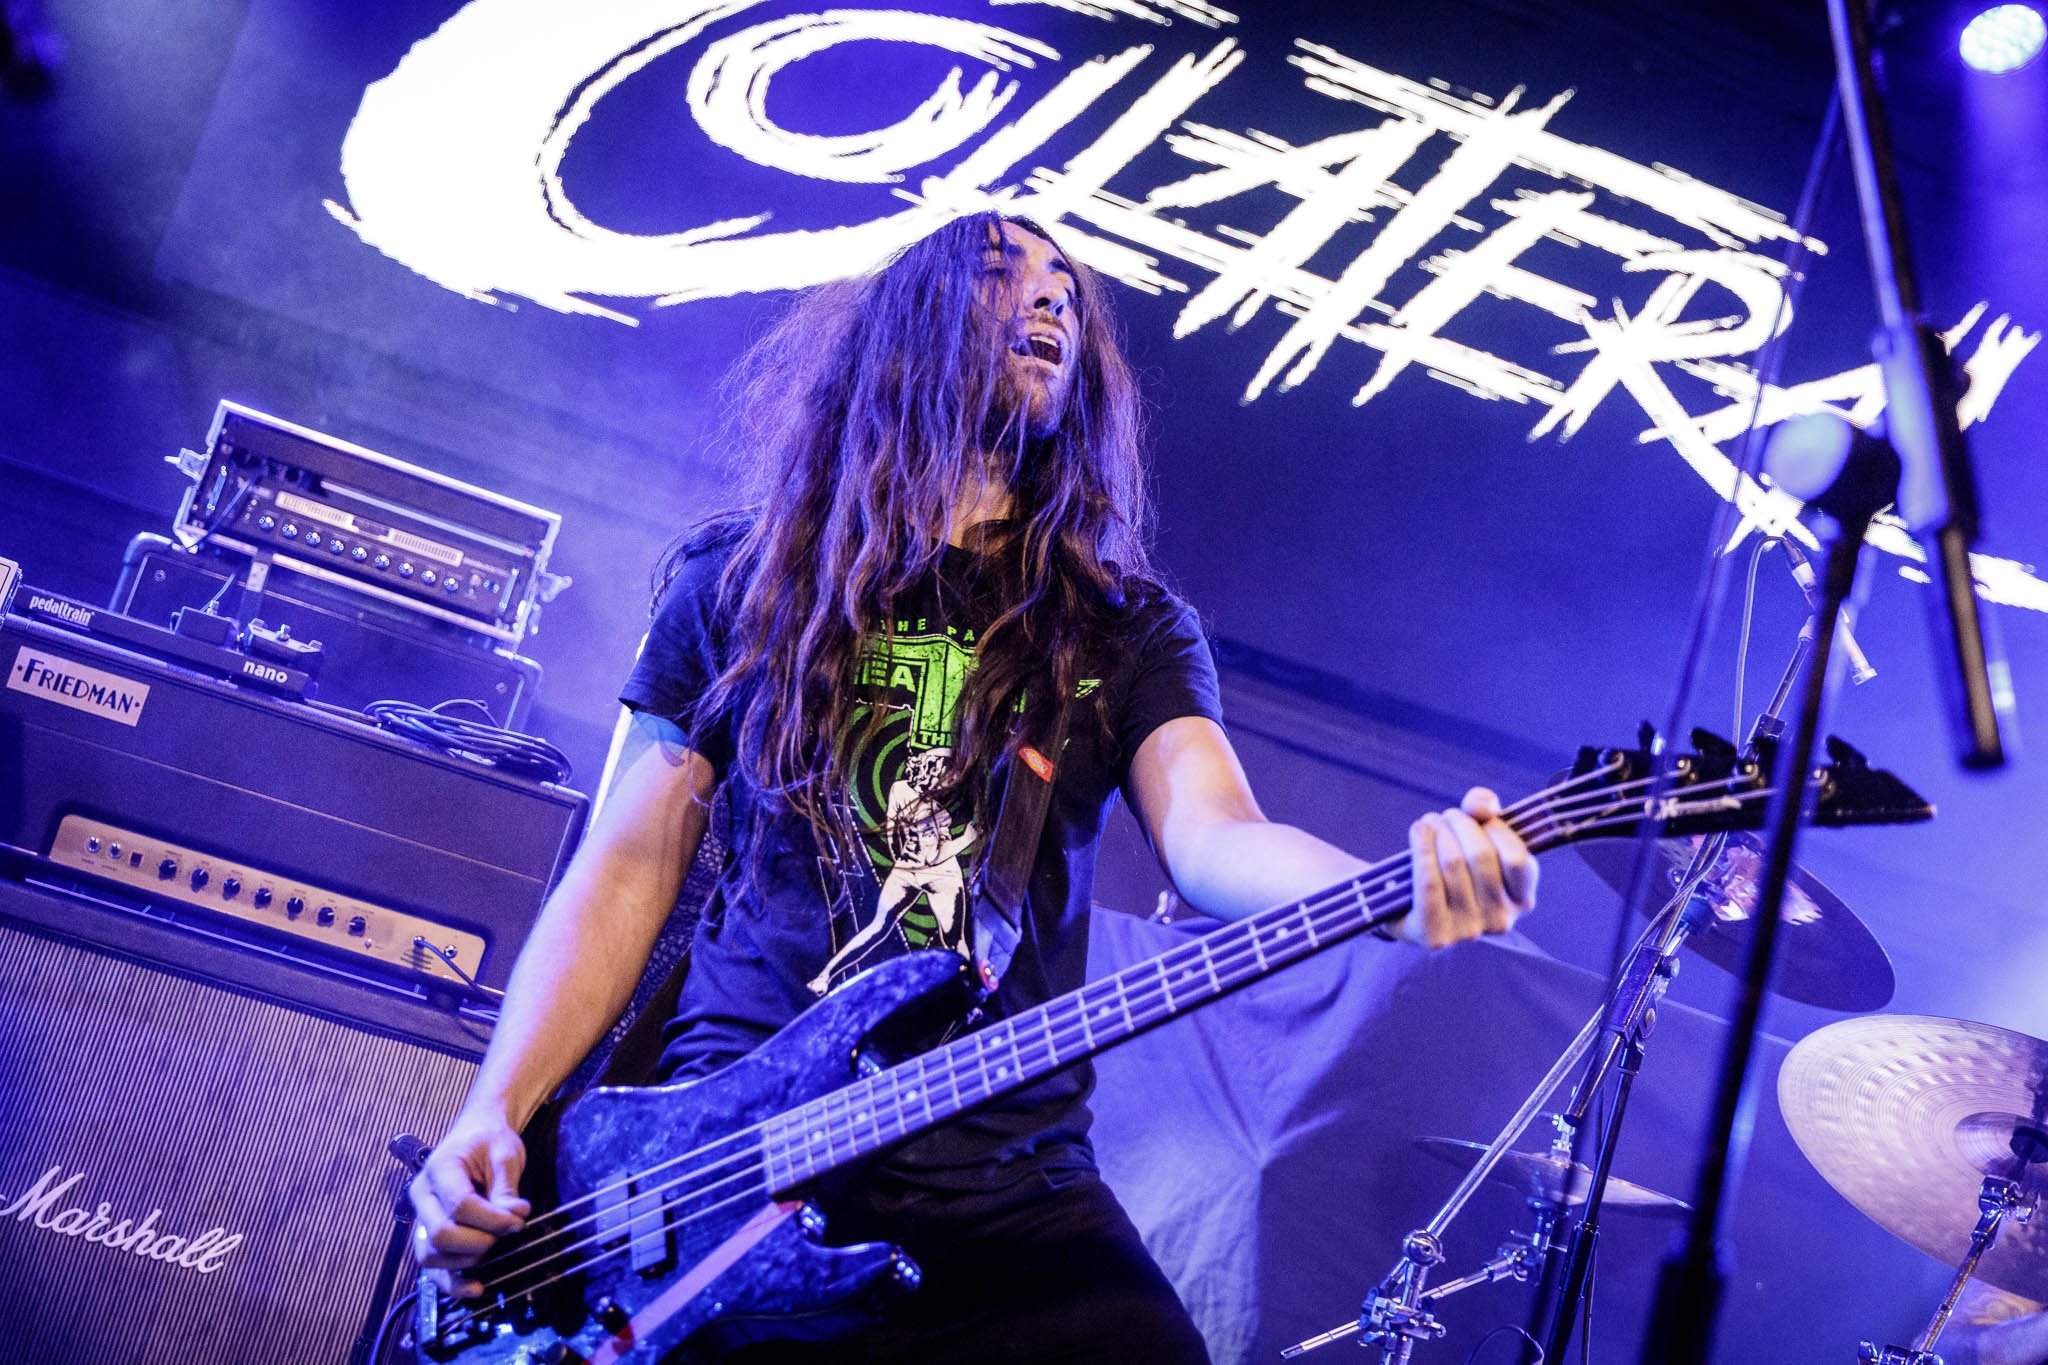 Collateral at Hangar 34 in Liverpool on September 3rd 2022 ©Joh